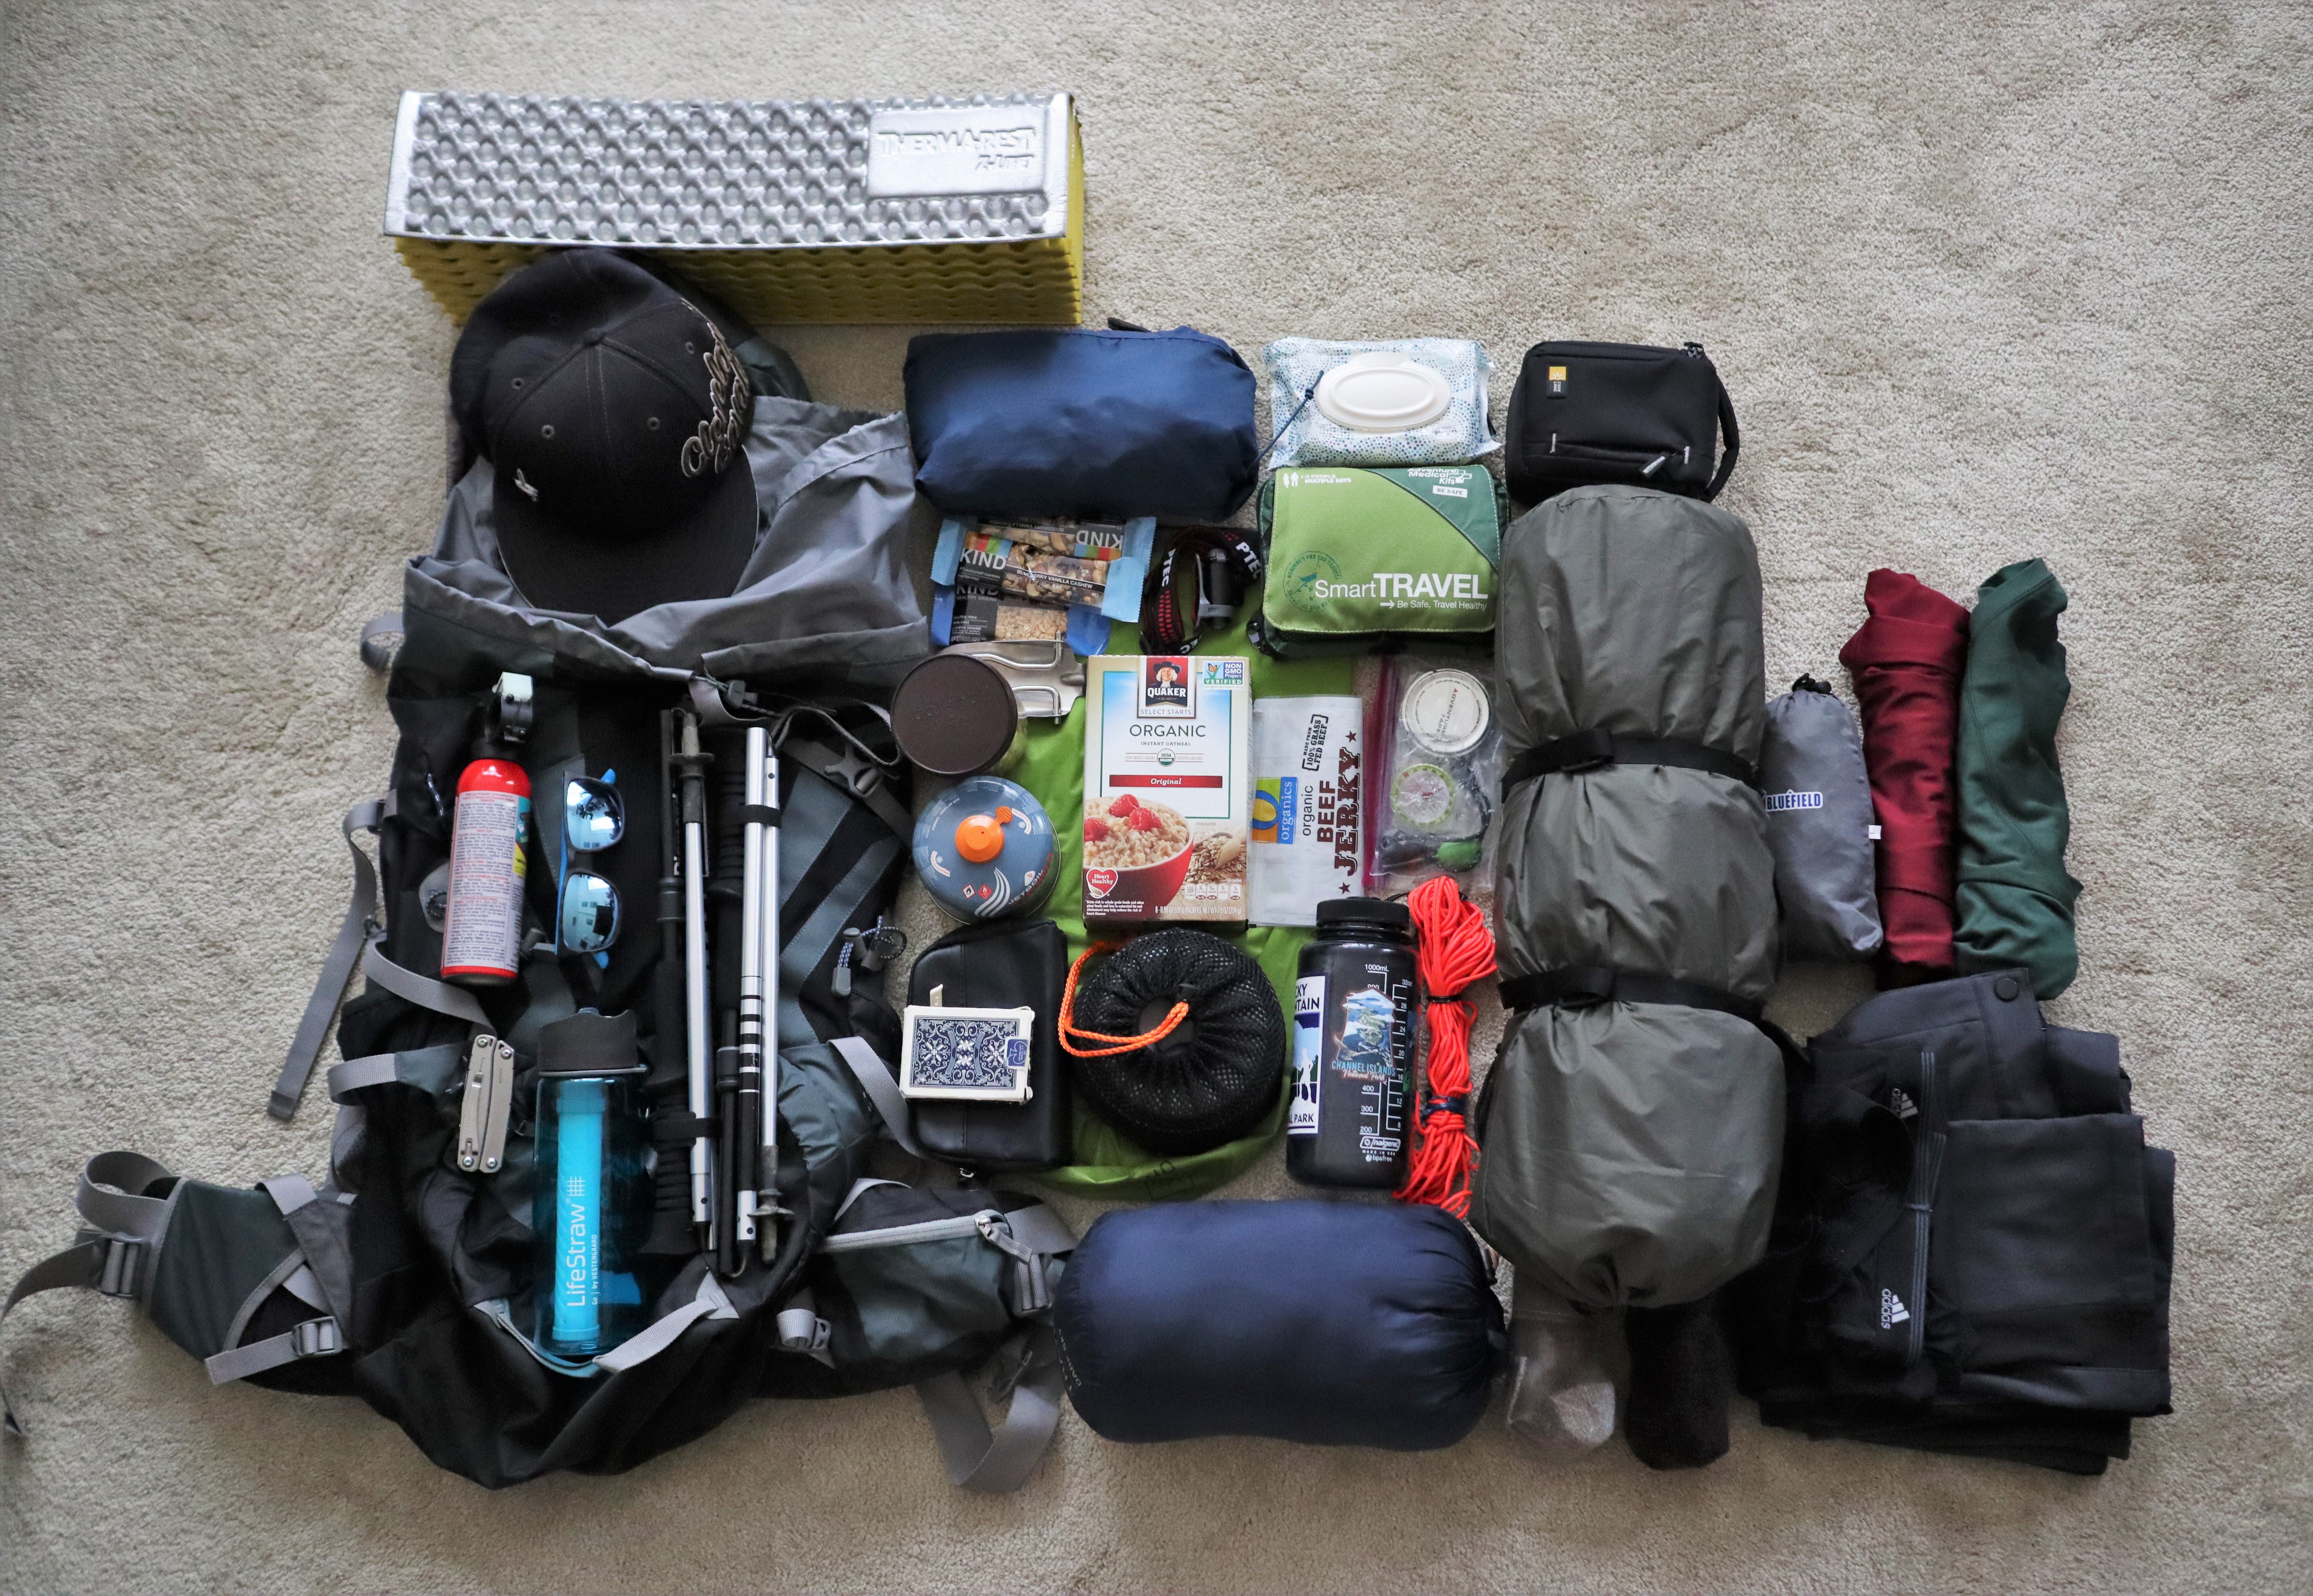 The Definitive Guide that You Never Wanted: Packing Your Backpack | by  Geoff | Pangolins with Packs